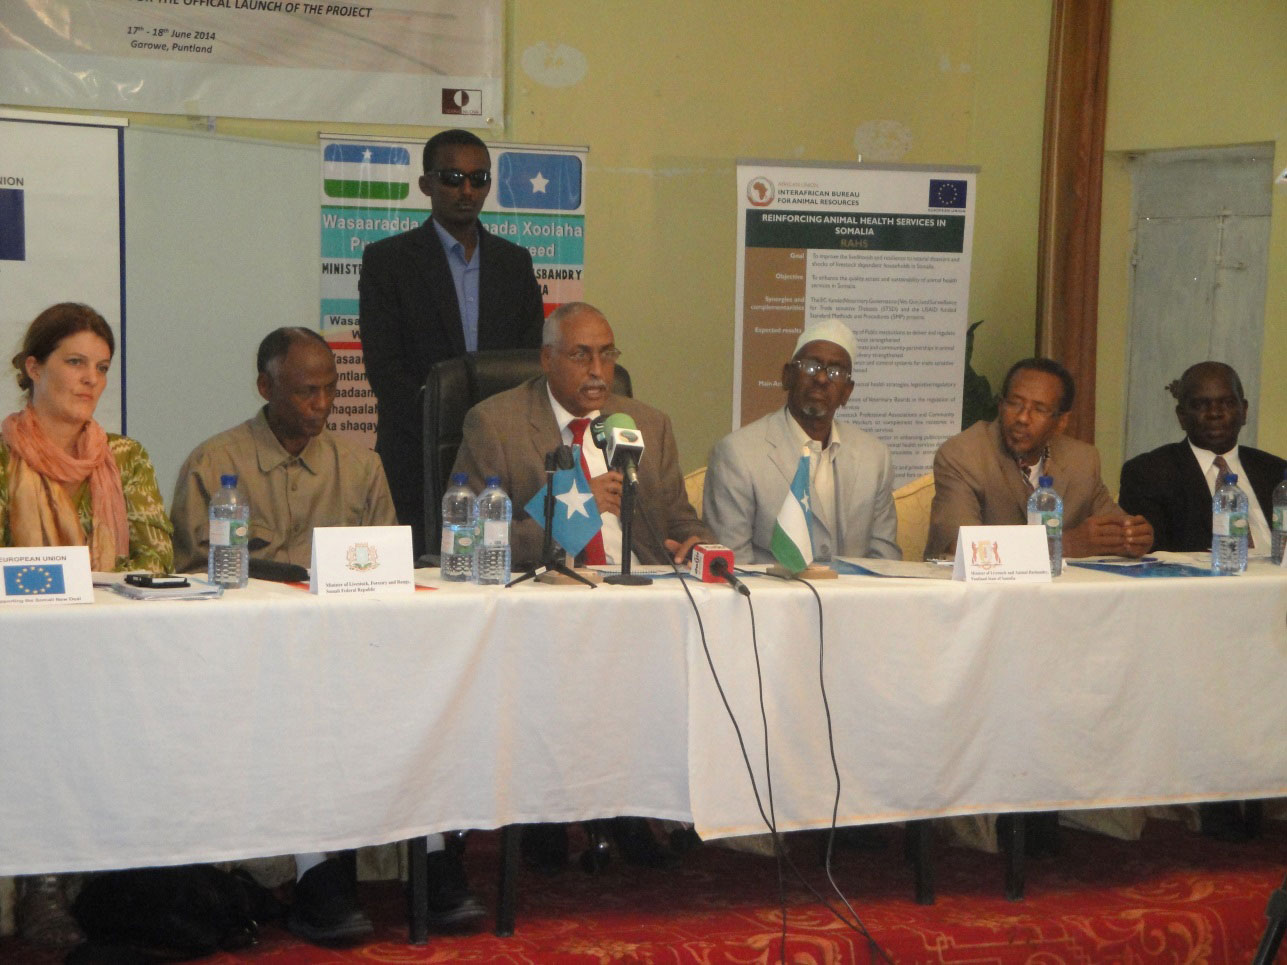  2014 AU-IBAR. His Excellency, Abdihakim Abdullahi Haji Omar Camay, the Acting President of the Puntland State of Somalia (Centre) officially launching the RAHS project accompanied by (seated L-R), Ms. Daria Fane, the Head of Cooperation of the EU Delegation to Somalia, Hon. Prof. Salim Alio Ibro, the Minister of Livestock, Forestry and Range of the Somali Federal Republic, Hon. Abullahi Duuale, the Puntland Minister of Livestock and Animal Husbandry, Hon. Abdi Ismail Boss, the Puntland Minister of Agricult